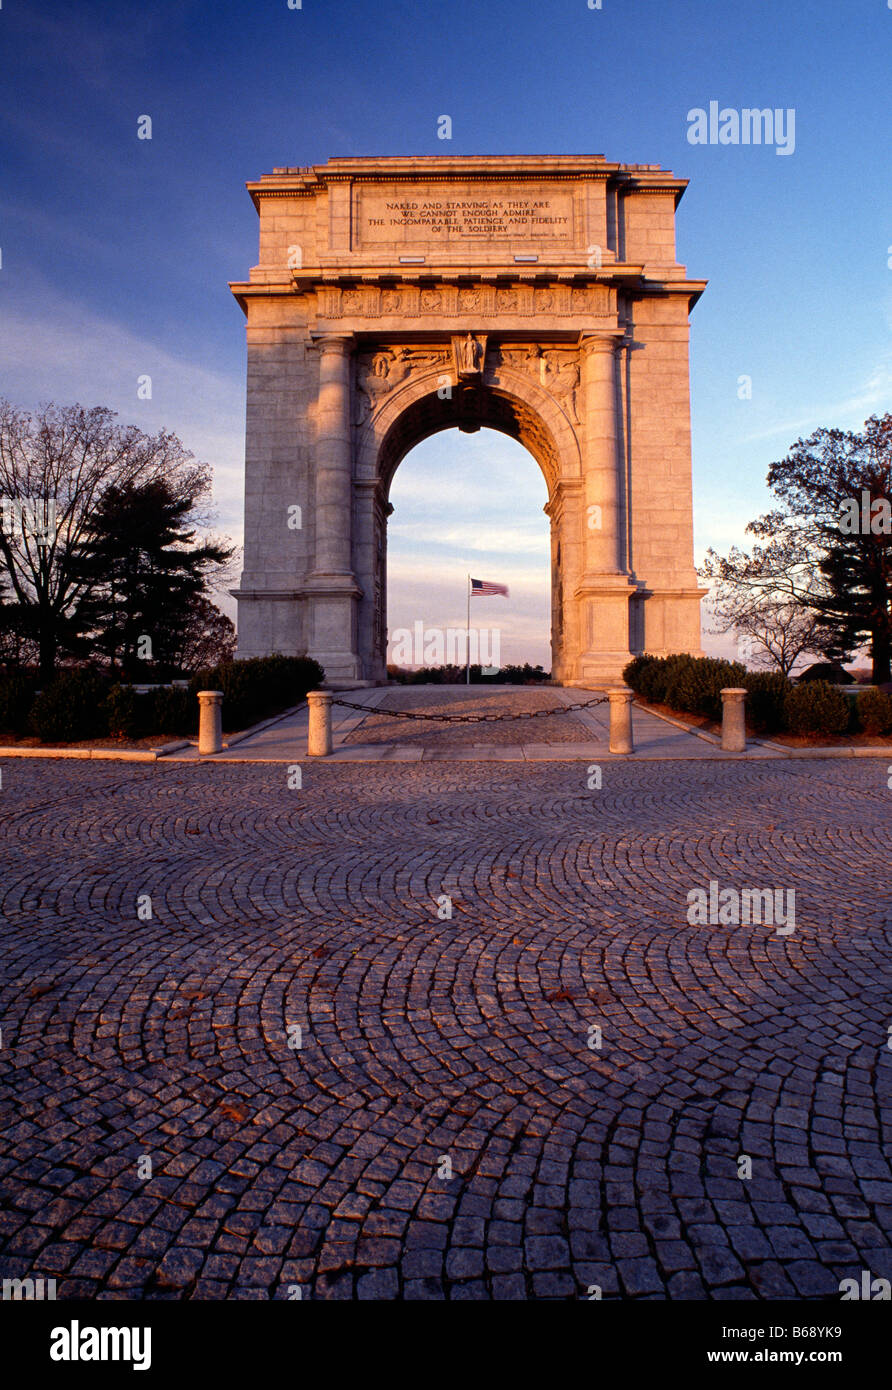 NATIONAL MEMORIAL ARCH, VALLEY FORGE NATIONAL HISTORICAL PARK, VALLEY FORGE, PENNSYLVANIA, USA Stockfoto